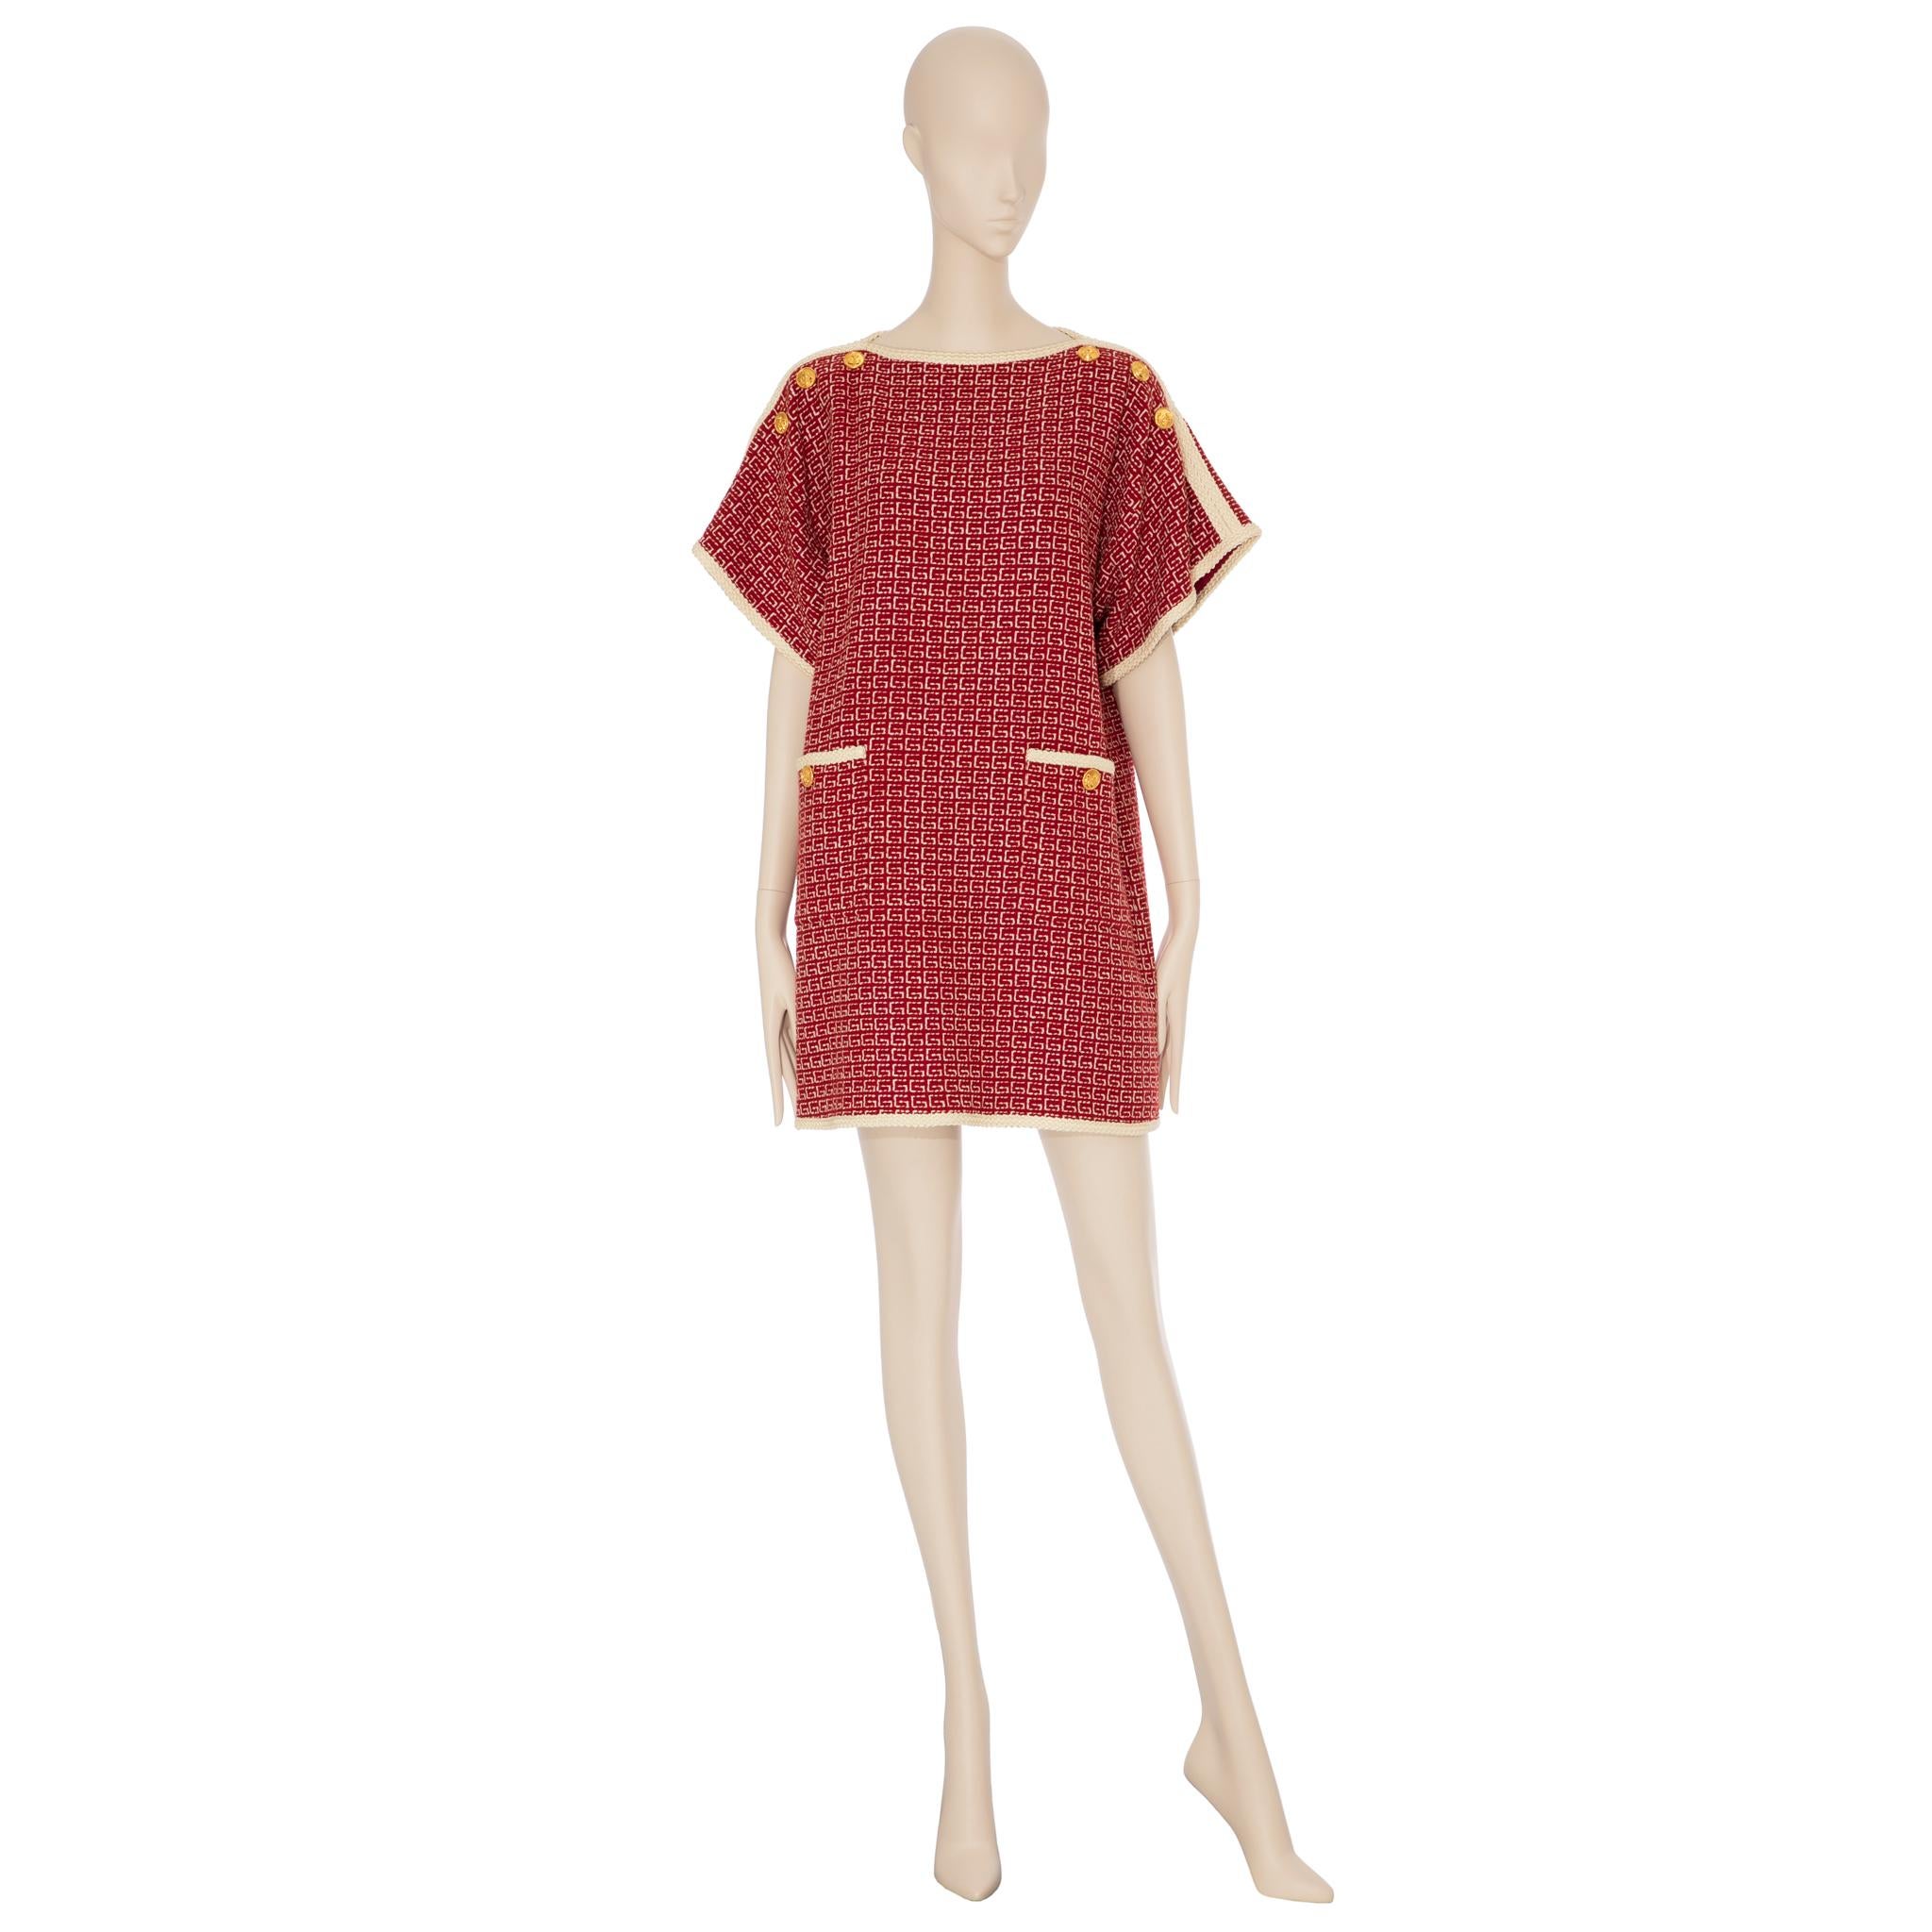 Gucci Tweed Red & Off-White Tunic Dress 38 IT In New Condition For Sale In DOUBLE BAY, NSW